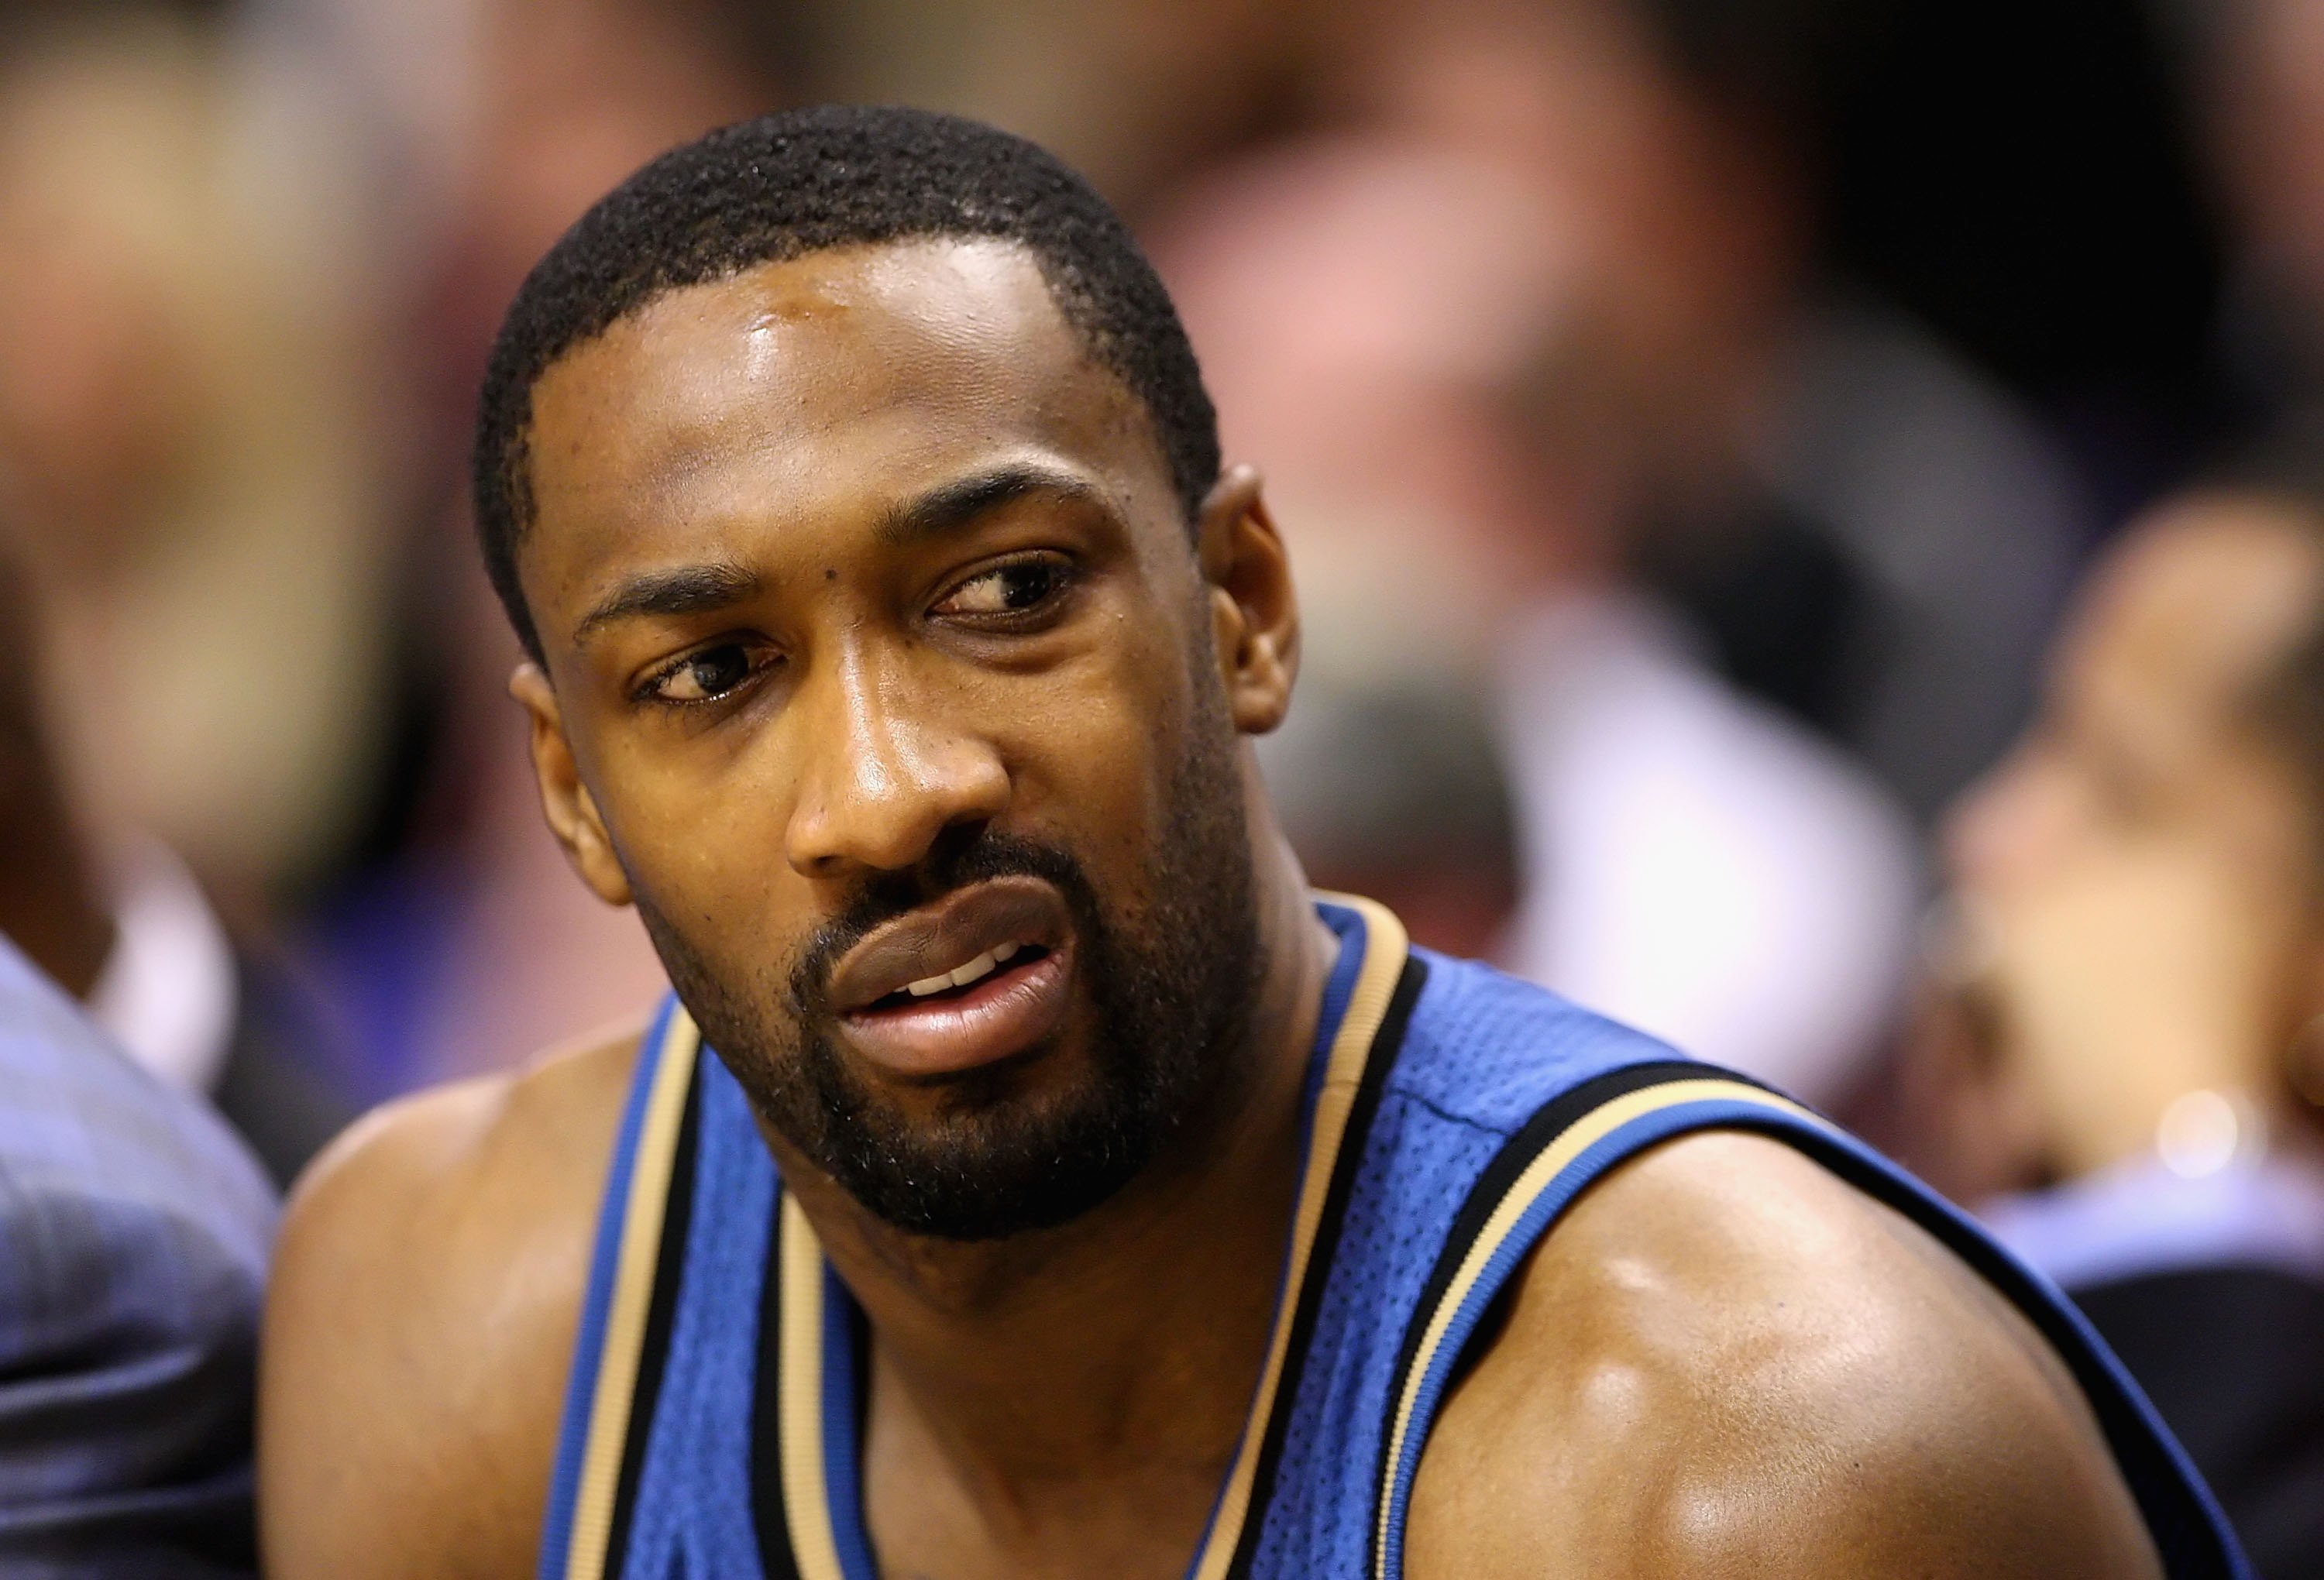 Gilbert Arenas sits on the bench during the NBA game against the Phoenix Suns at US Airways Center on December 19, 2009 in Phoenix, Arizona. | Photo: GettyImages